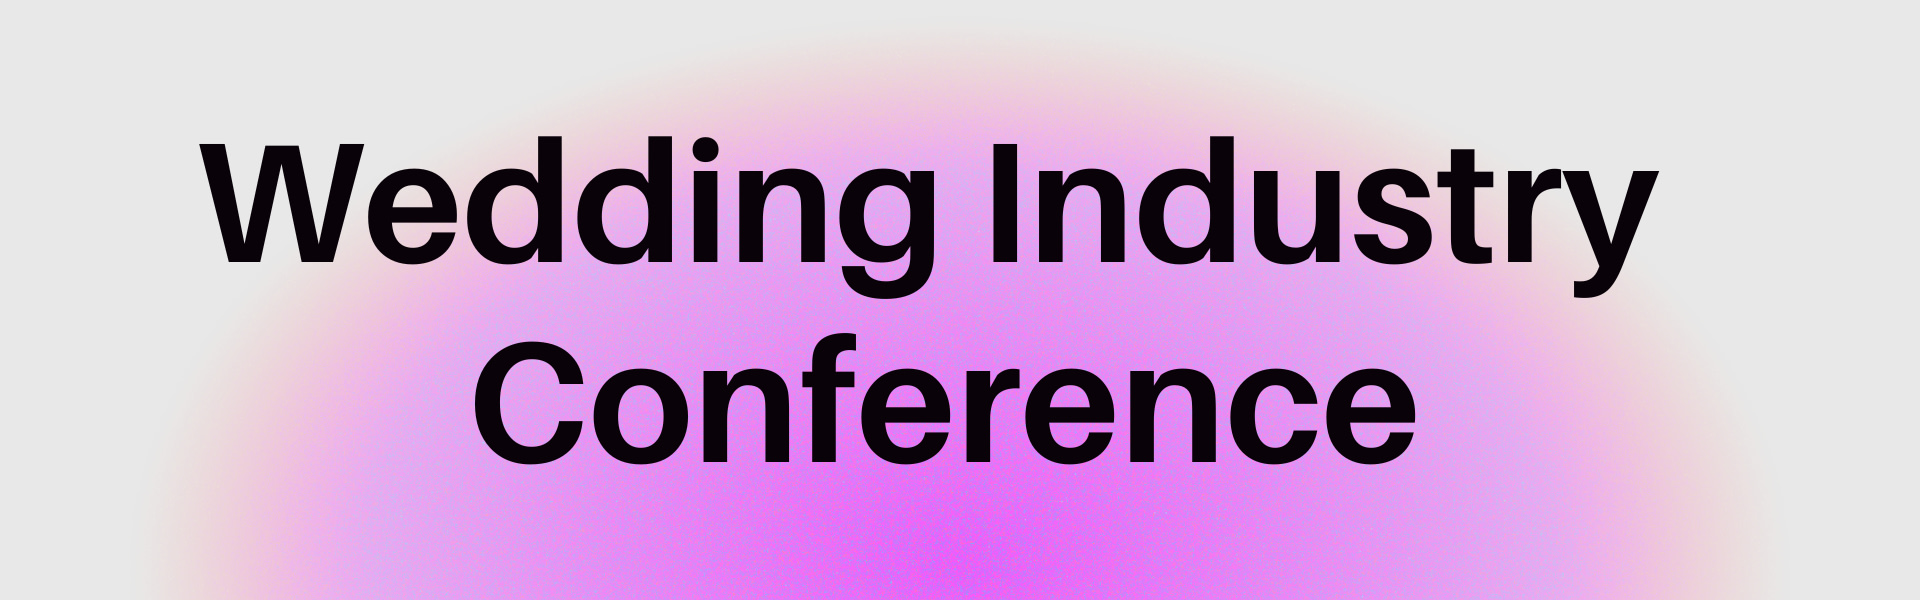 Wedding Industry Conference